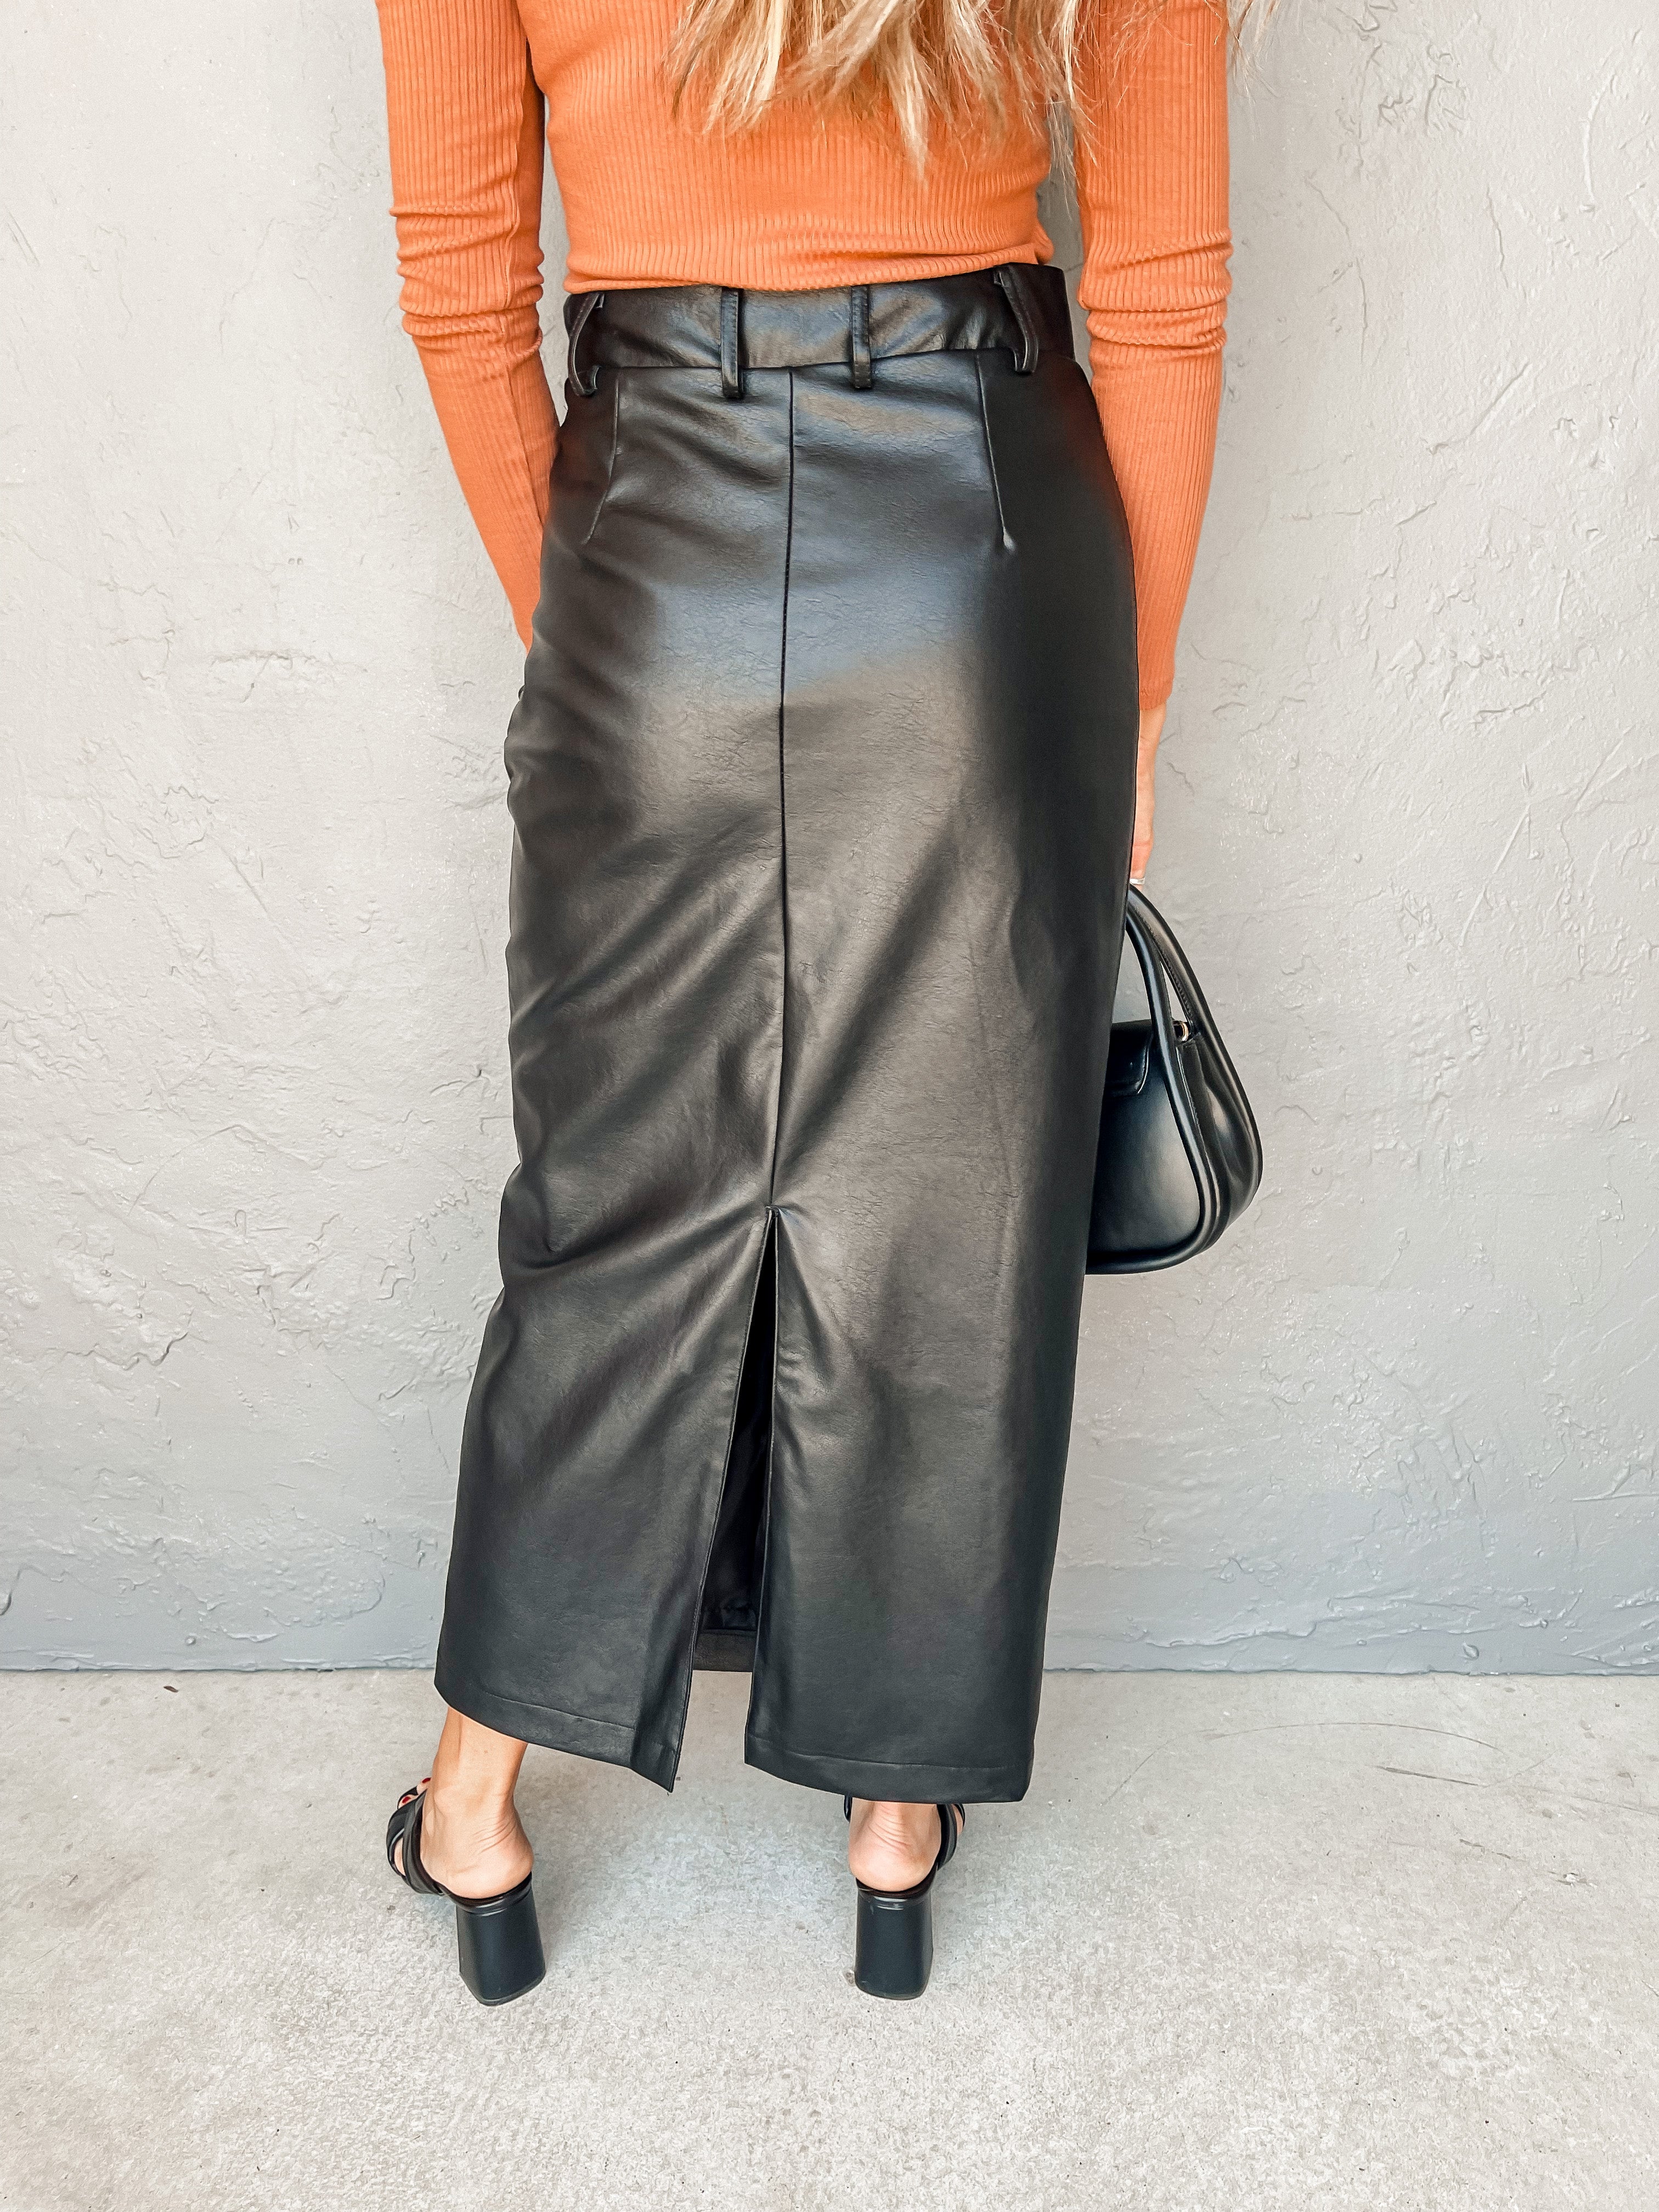 Faux Leather Skirt for Everyday Wear -